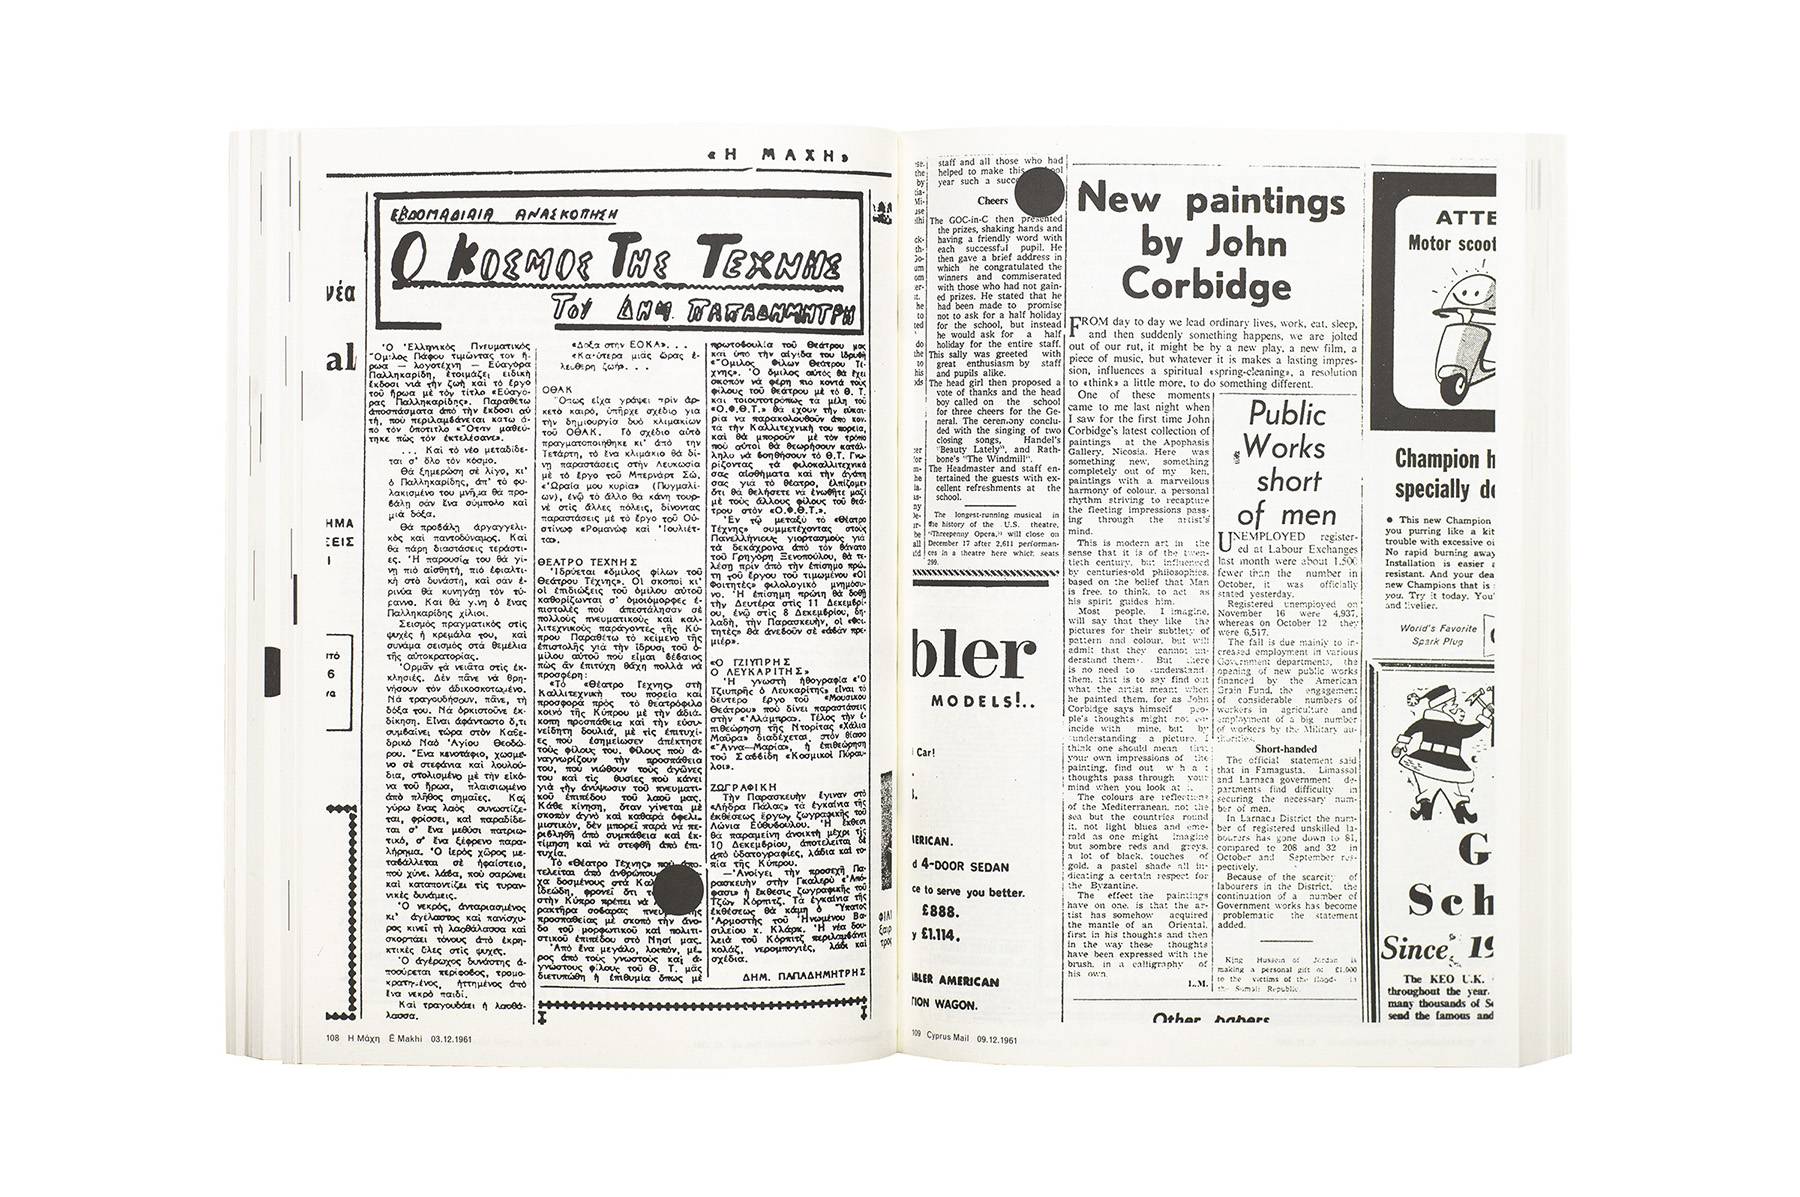 Product image of The Memory of the Archive: Christoforos Savva in the 1954 – 1968 Cypriot Press & Literary Periodicals